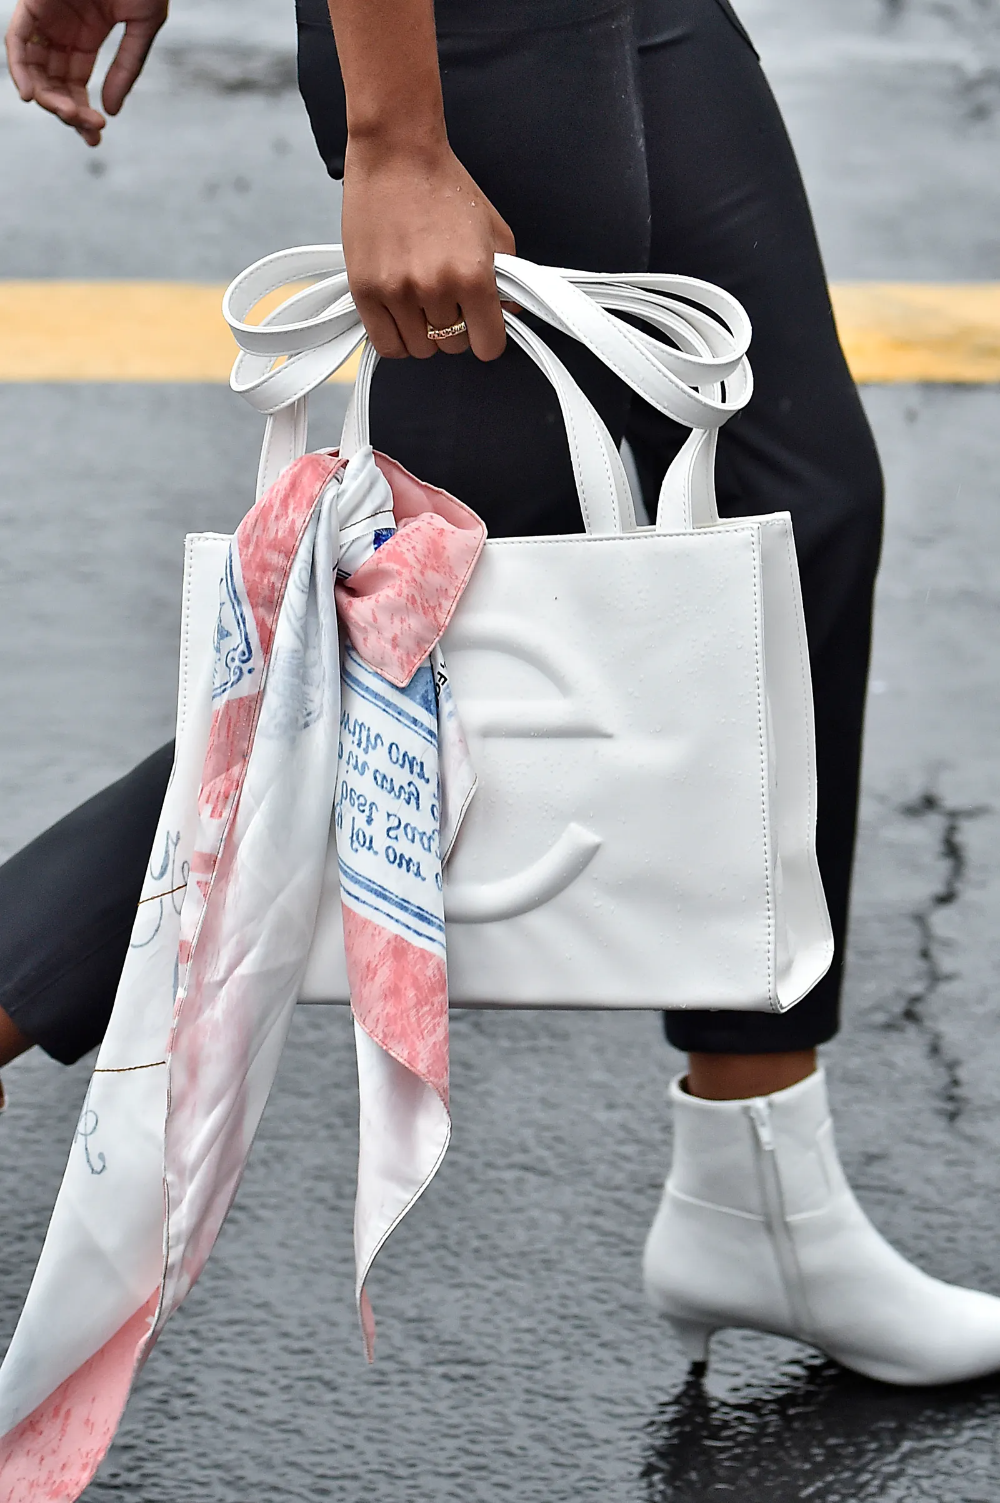 Telfar Clemens Says the Frenzy Over His Bags Is 'Beautiful